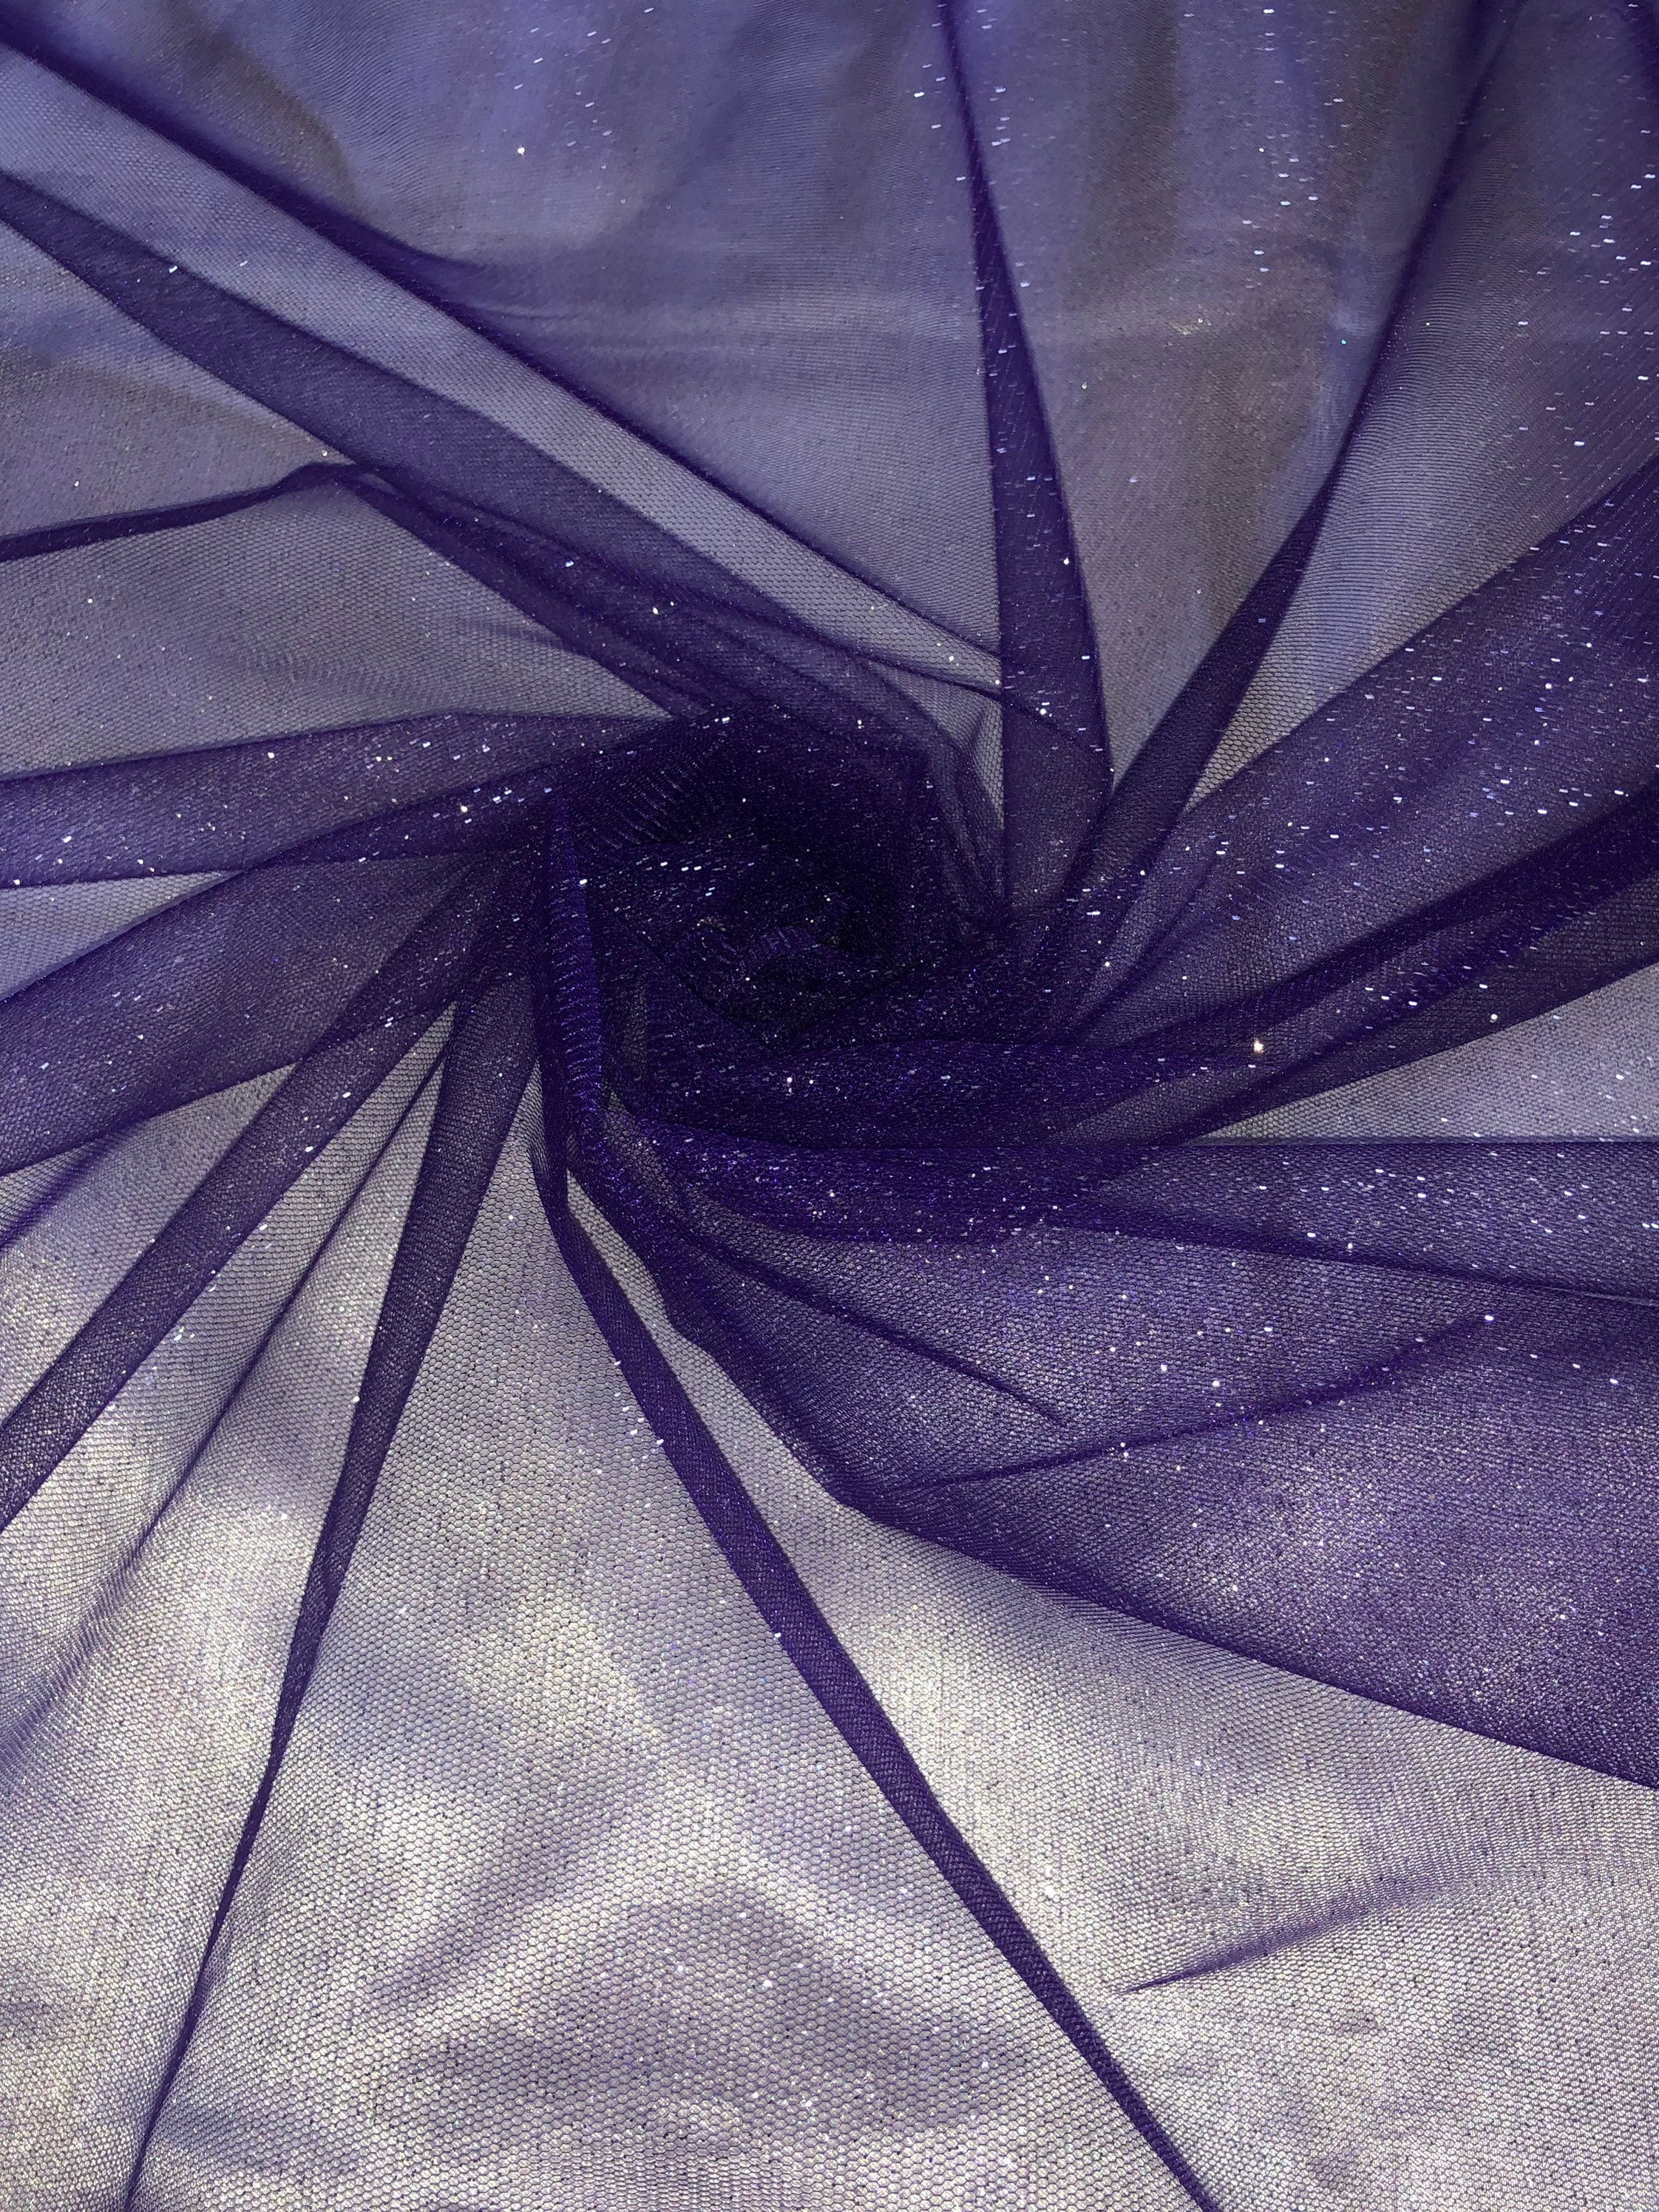 Sparkly Tulle - Purple Glitter - Roll 6 x 10 Yards - ShopWildThings